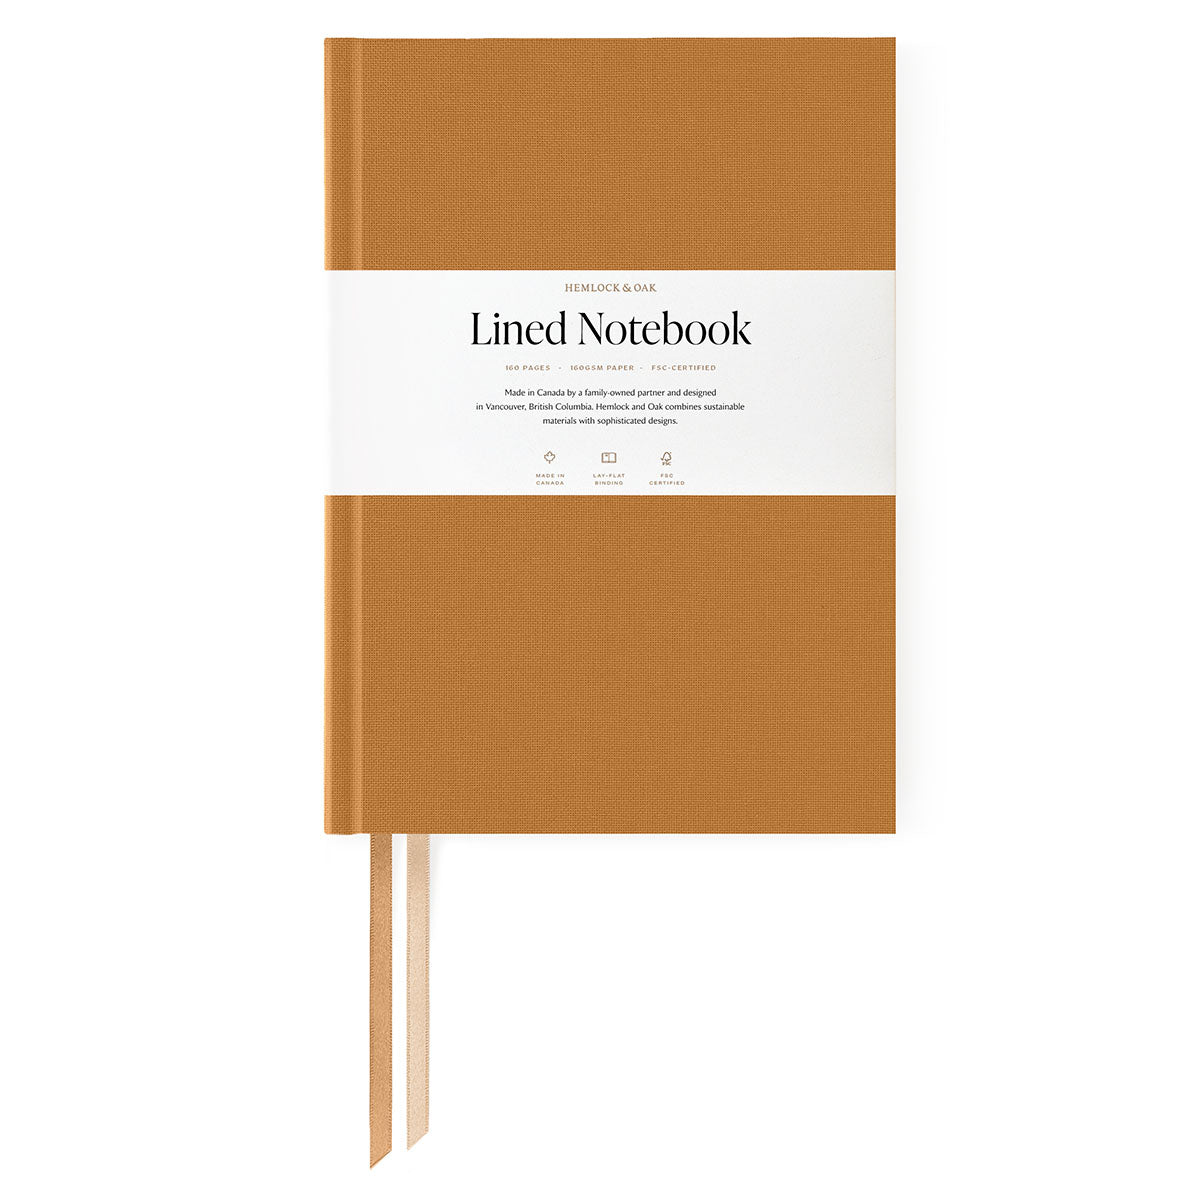 Lined Notebook - Blank Cover Marigold #color_ Marigold